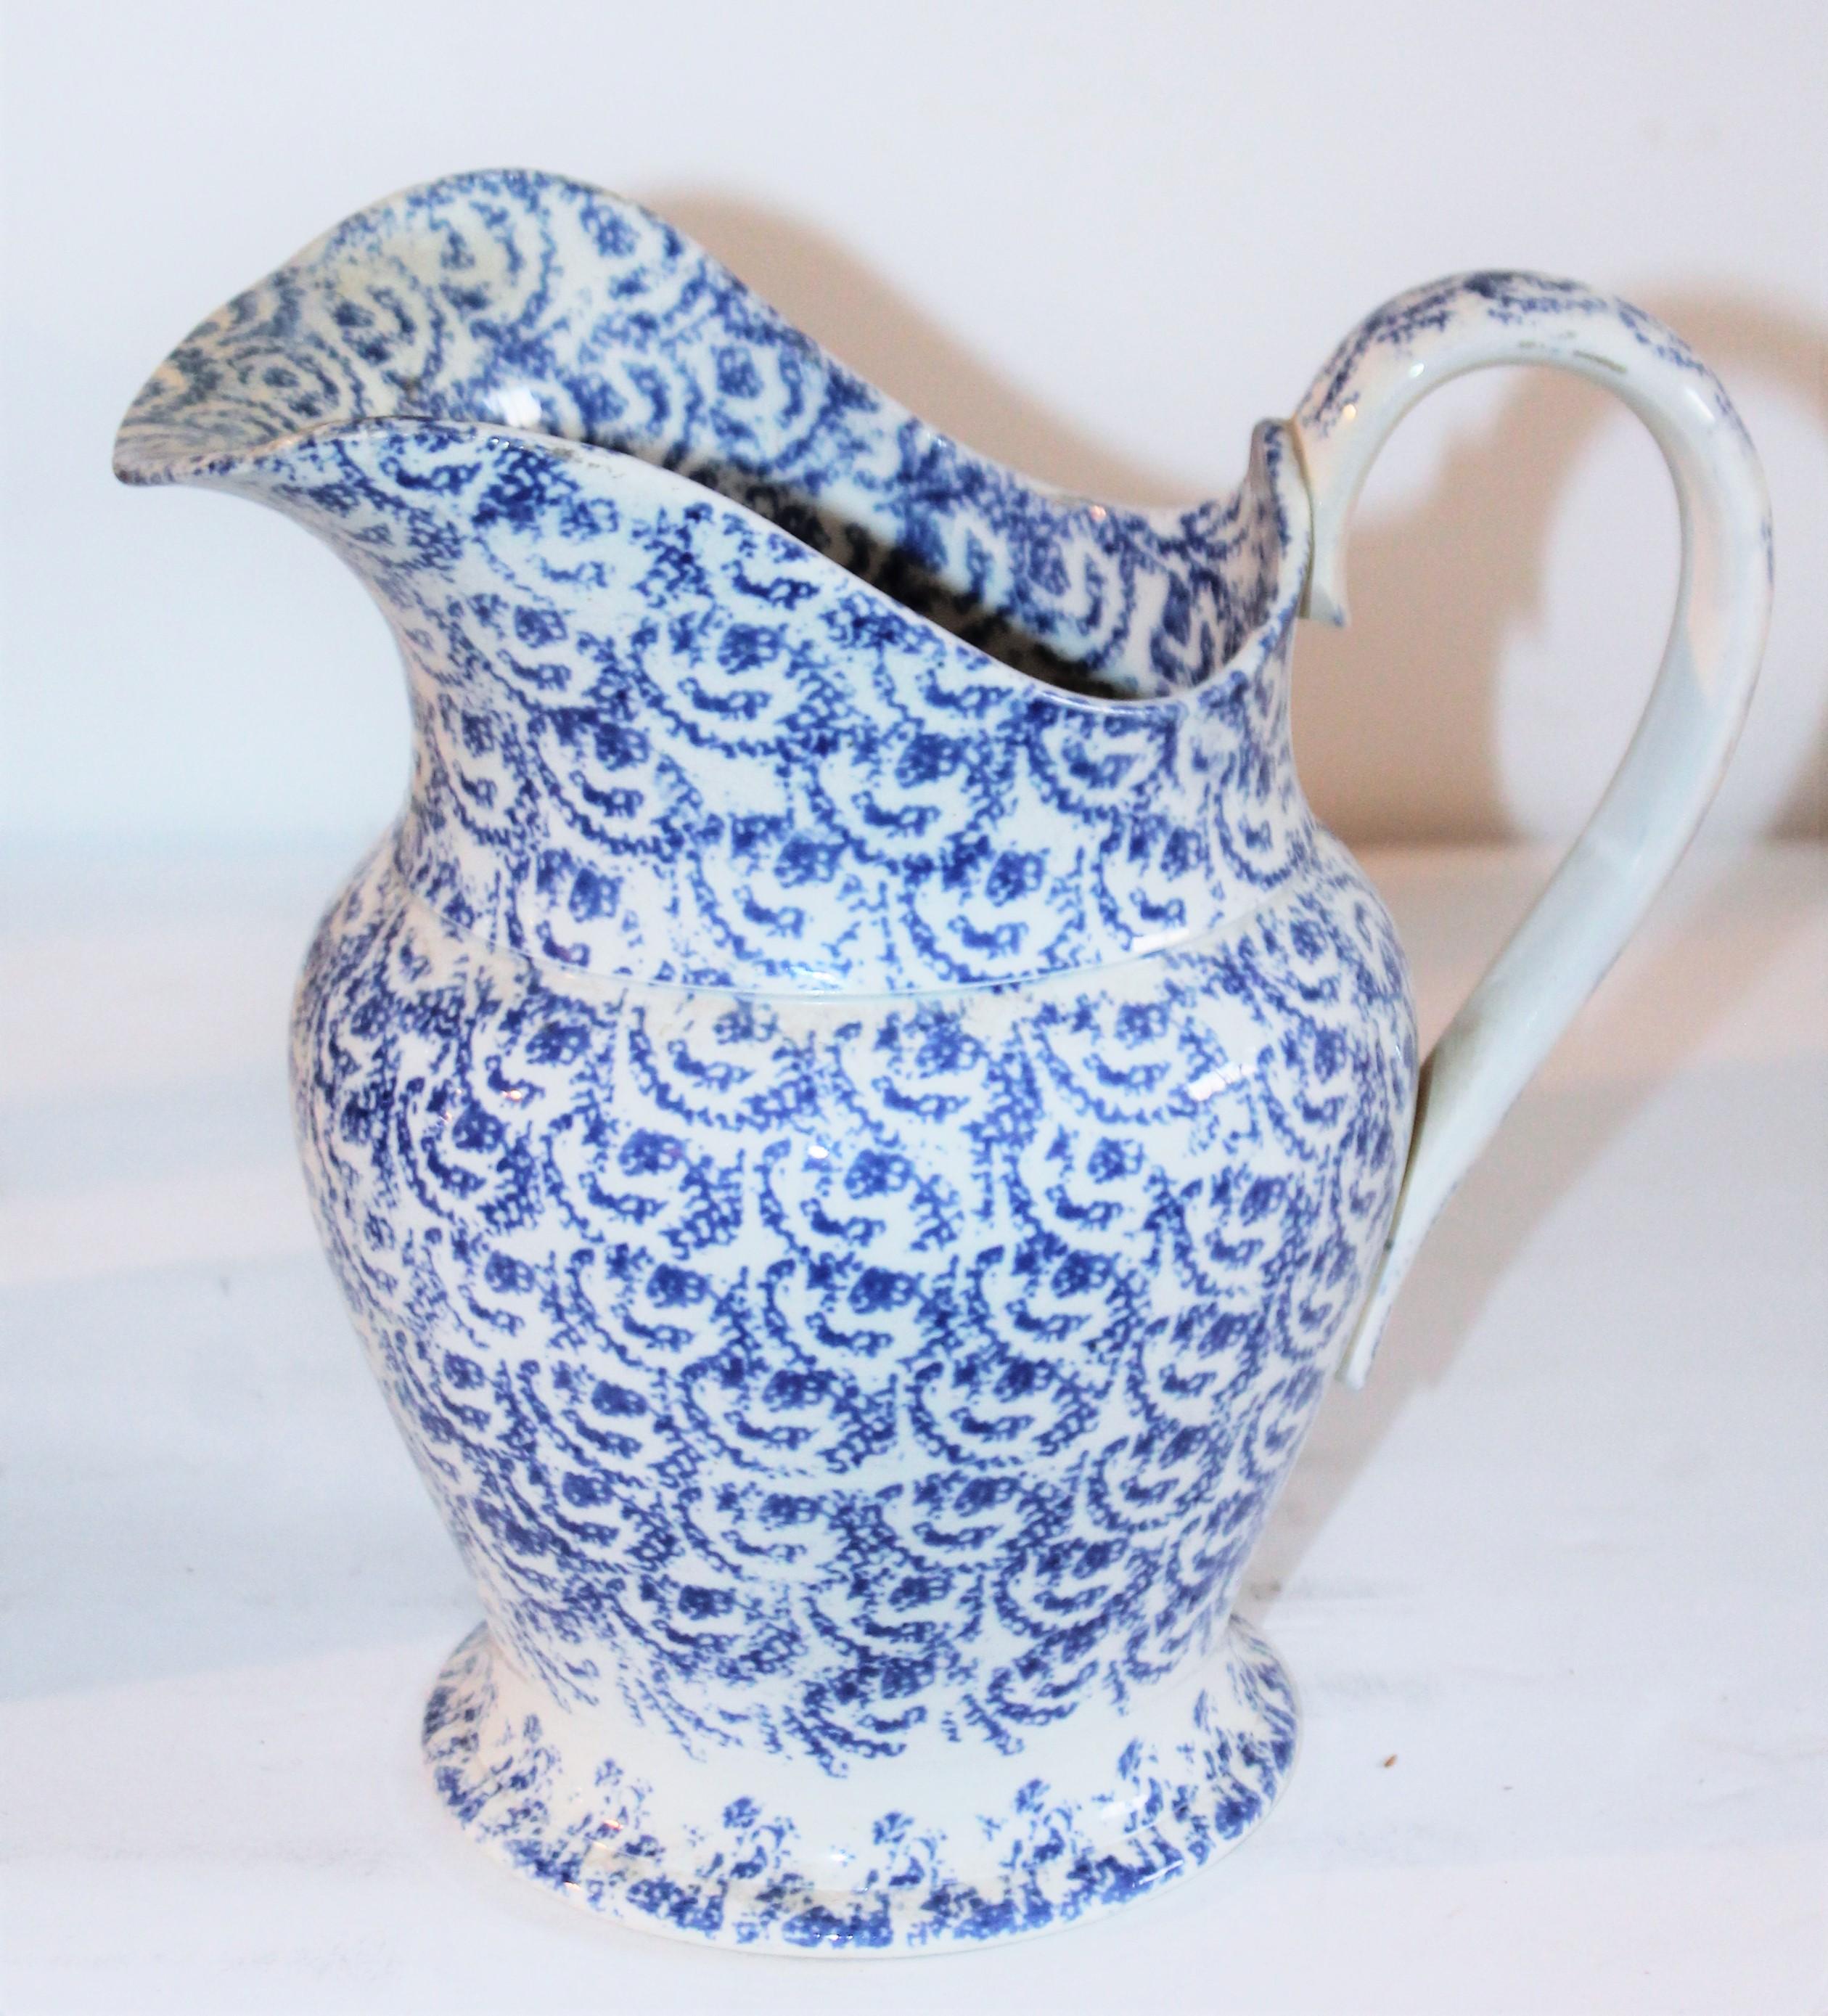 19th century sponge ware soft paste design sponge soft paste pitcher. The condition is very good and this is most unusual.